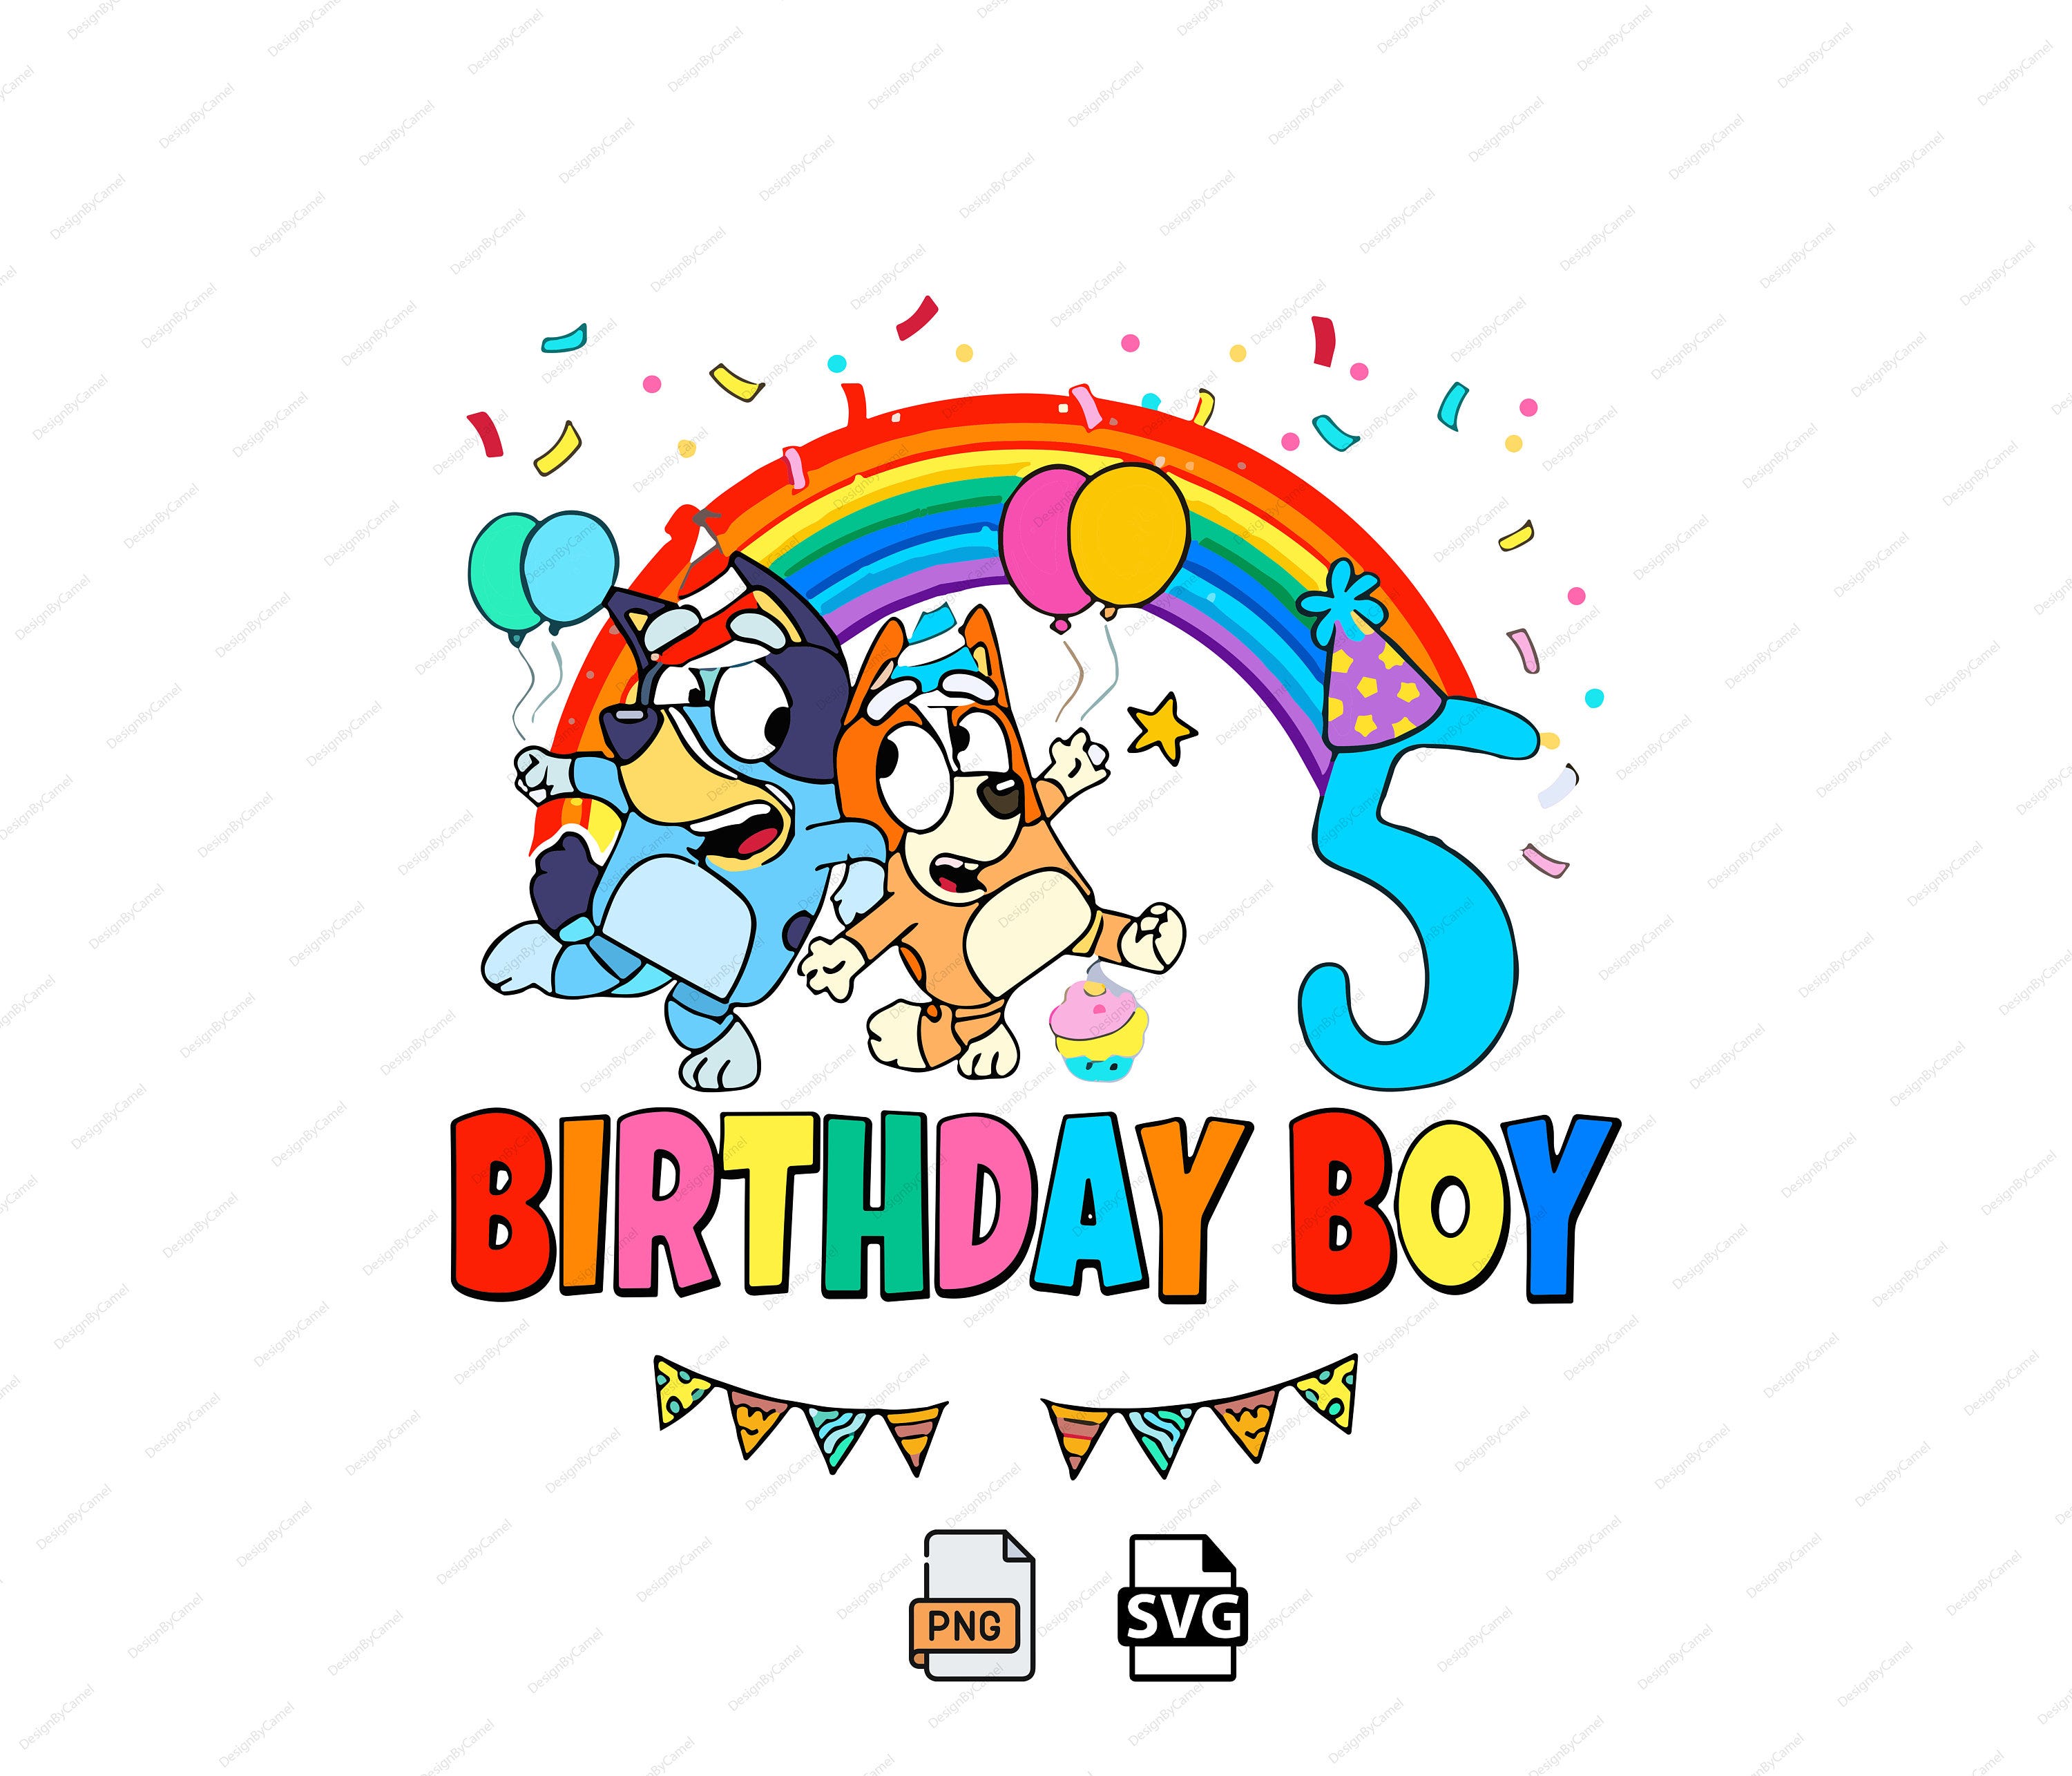 Bluey Birthday PNG, Birthday Boy Png, Bluey Png, Bluey Png File, Bluey Party Png, Bluey Family png, Bluey Dogs Png